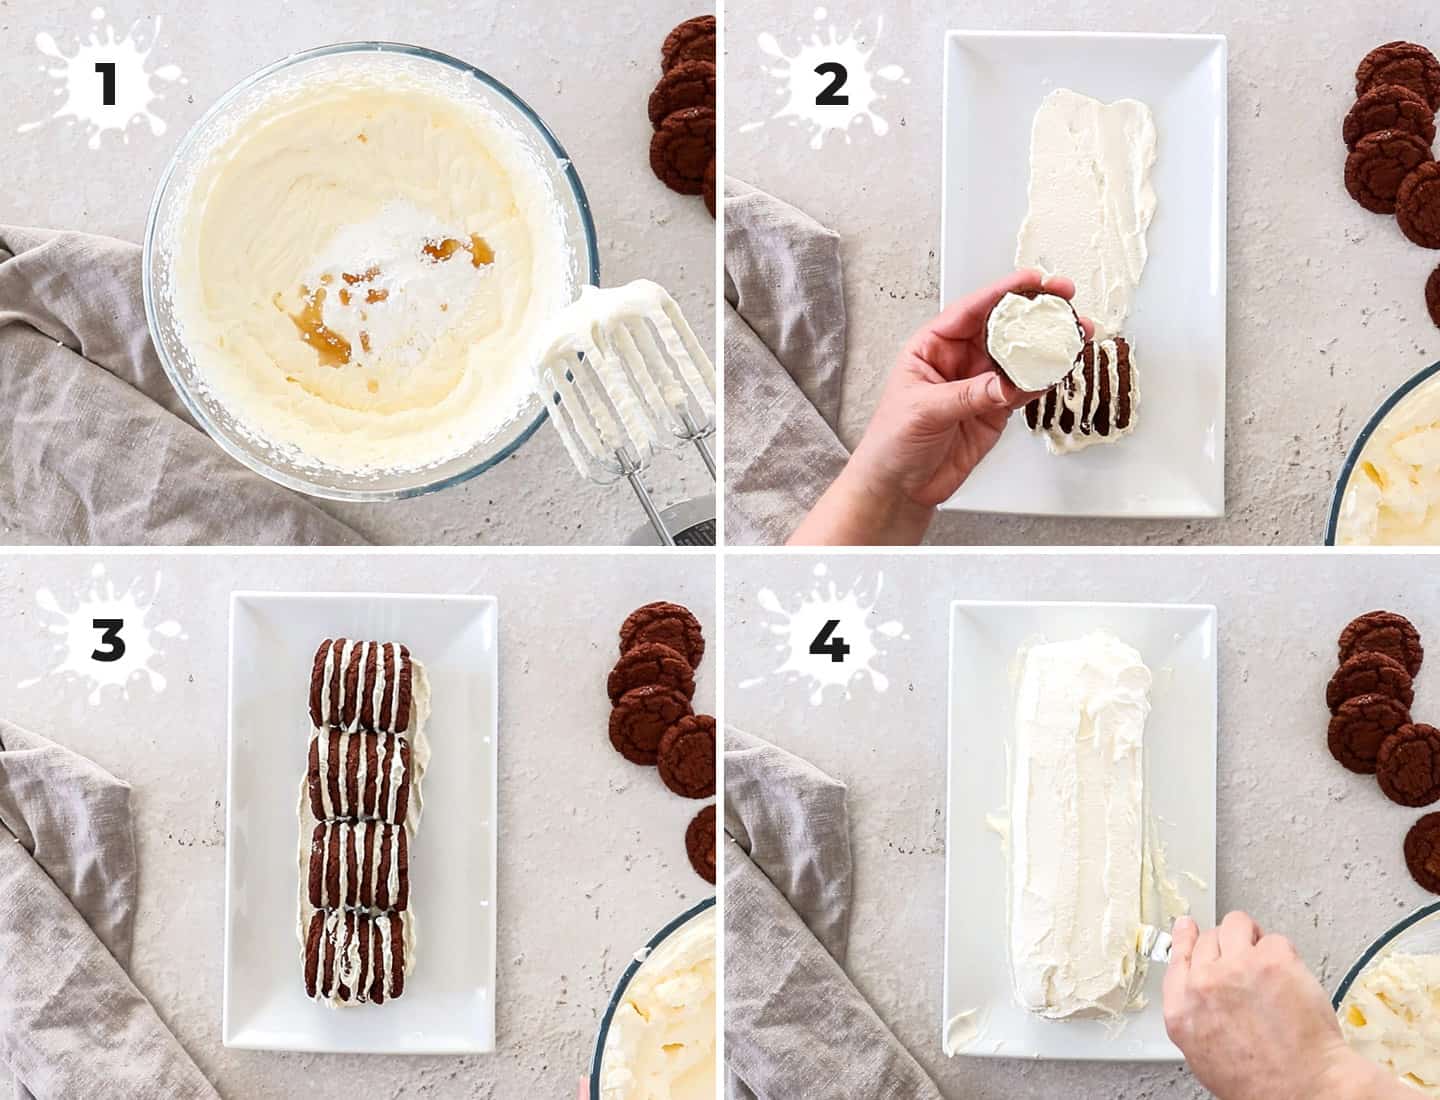 A collage of 4 images showing how to make choc ripple cake.